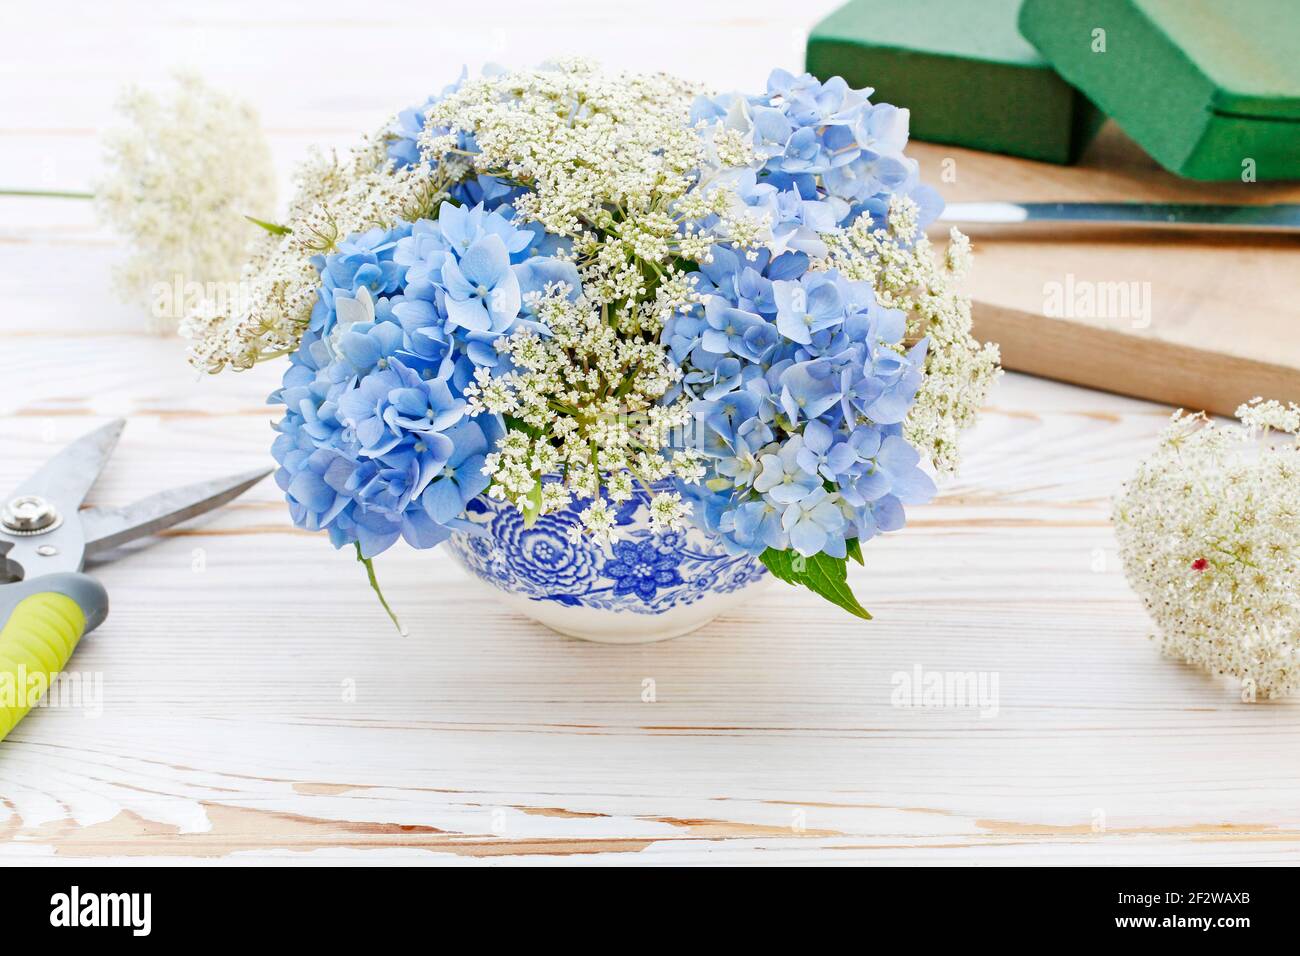 Florist at wotk: How to make floral arrangement with blue hortensia (hydrangea) and white Queen Anne's lace (daucus carota) flowers on white wooden ta Stock Photo